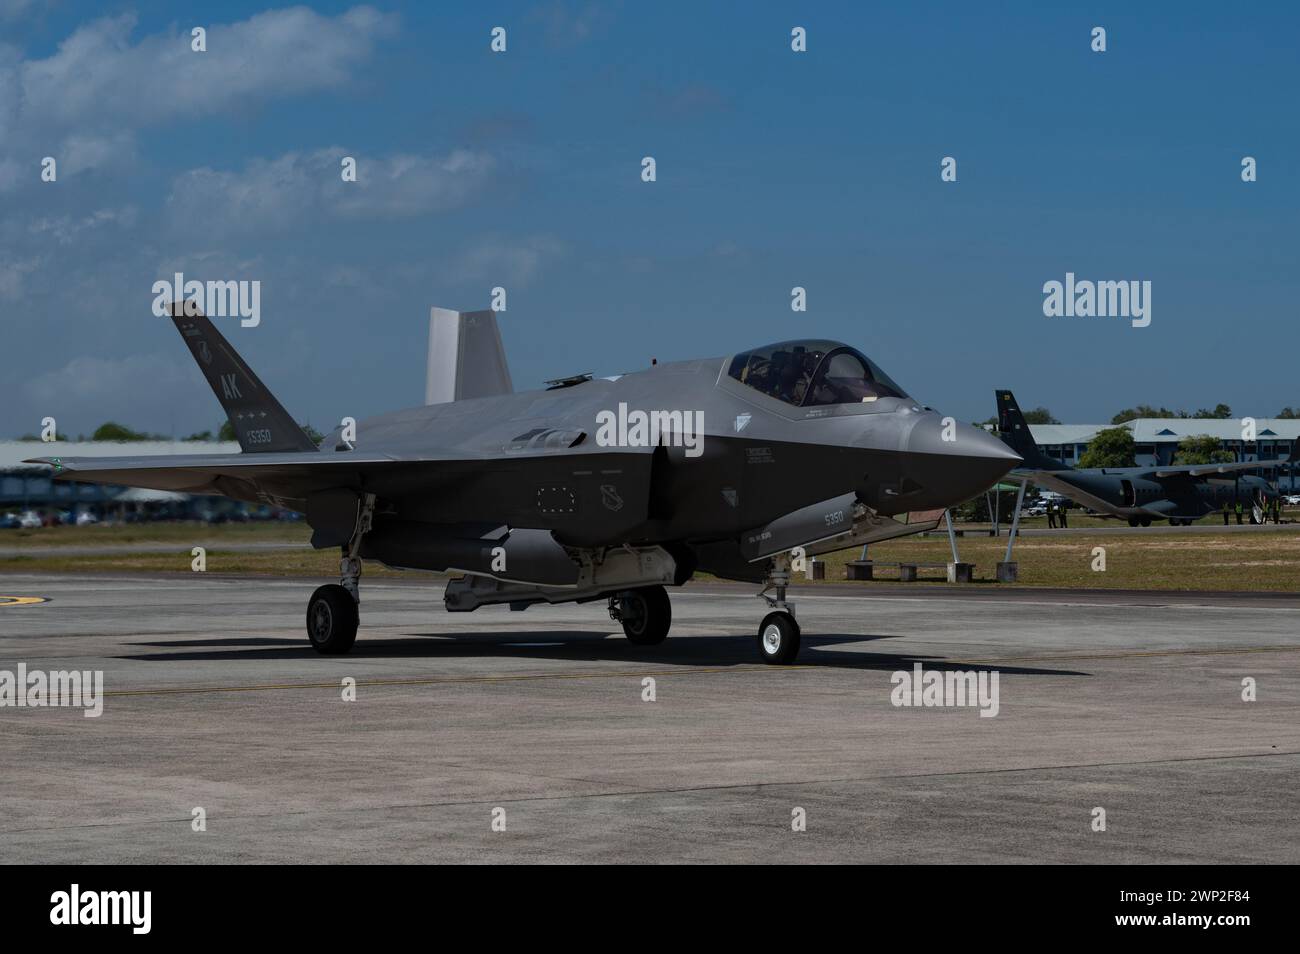 A U.S. Air Force F-35 Lightning II assigned to Eielson Air Force Base, Alaska, parks at Royal Brunei Air Force Base Rimba, Brunei, Brunei. Stock Photo